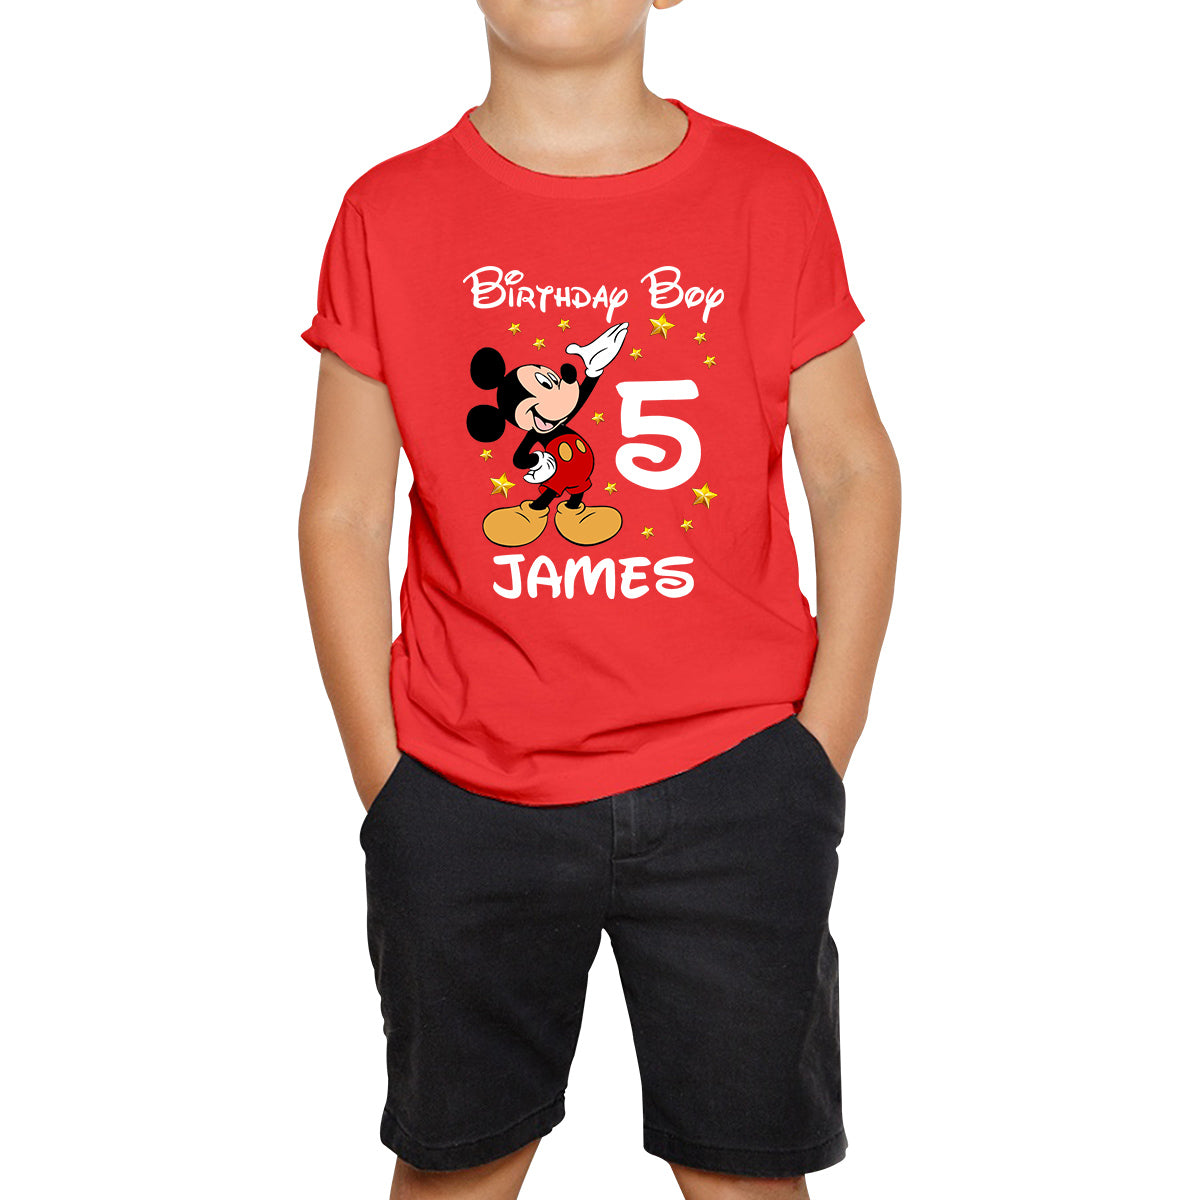 Personalised Happy Birthday Your Name Disney Minnie Mouse Cute Cartoon Character Birthday Party Costume Kids T Shirt